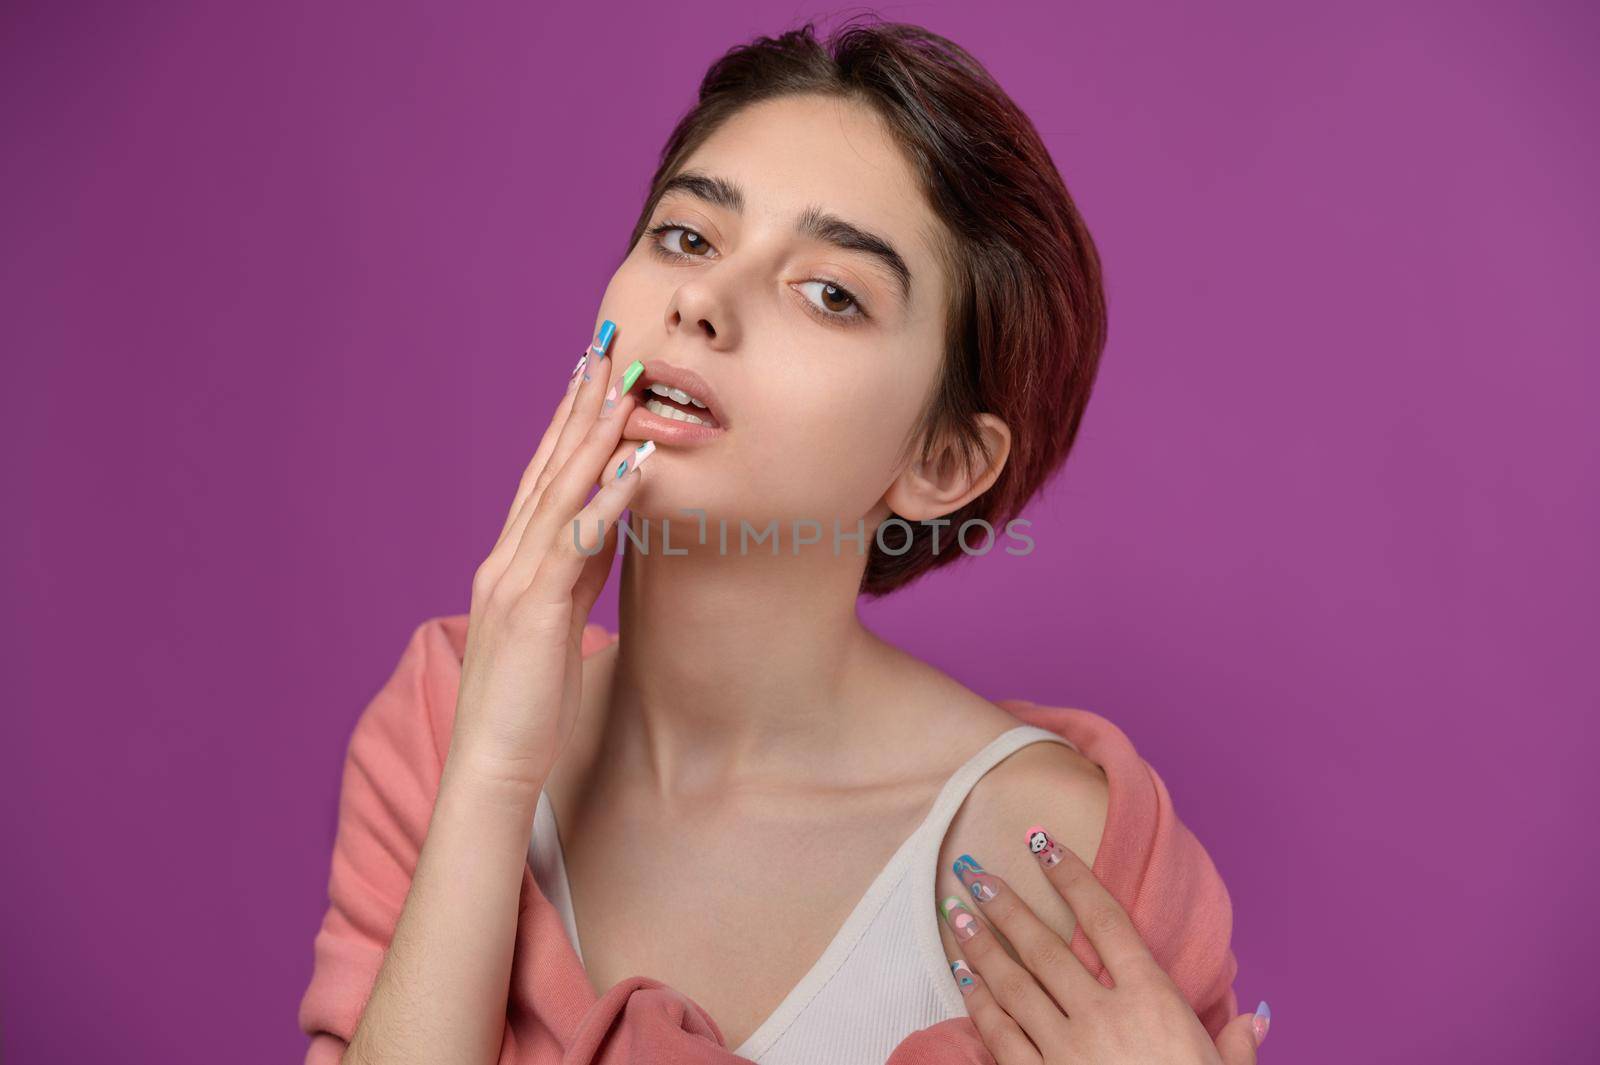 Sensual studio portrait of a young delicate skinny brunette girl, showing an exravagant nail art on her right arm. On a purple background.